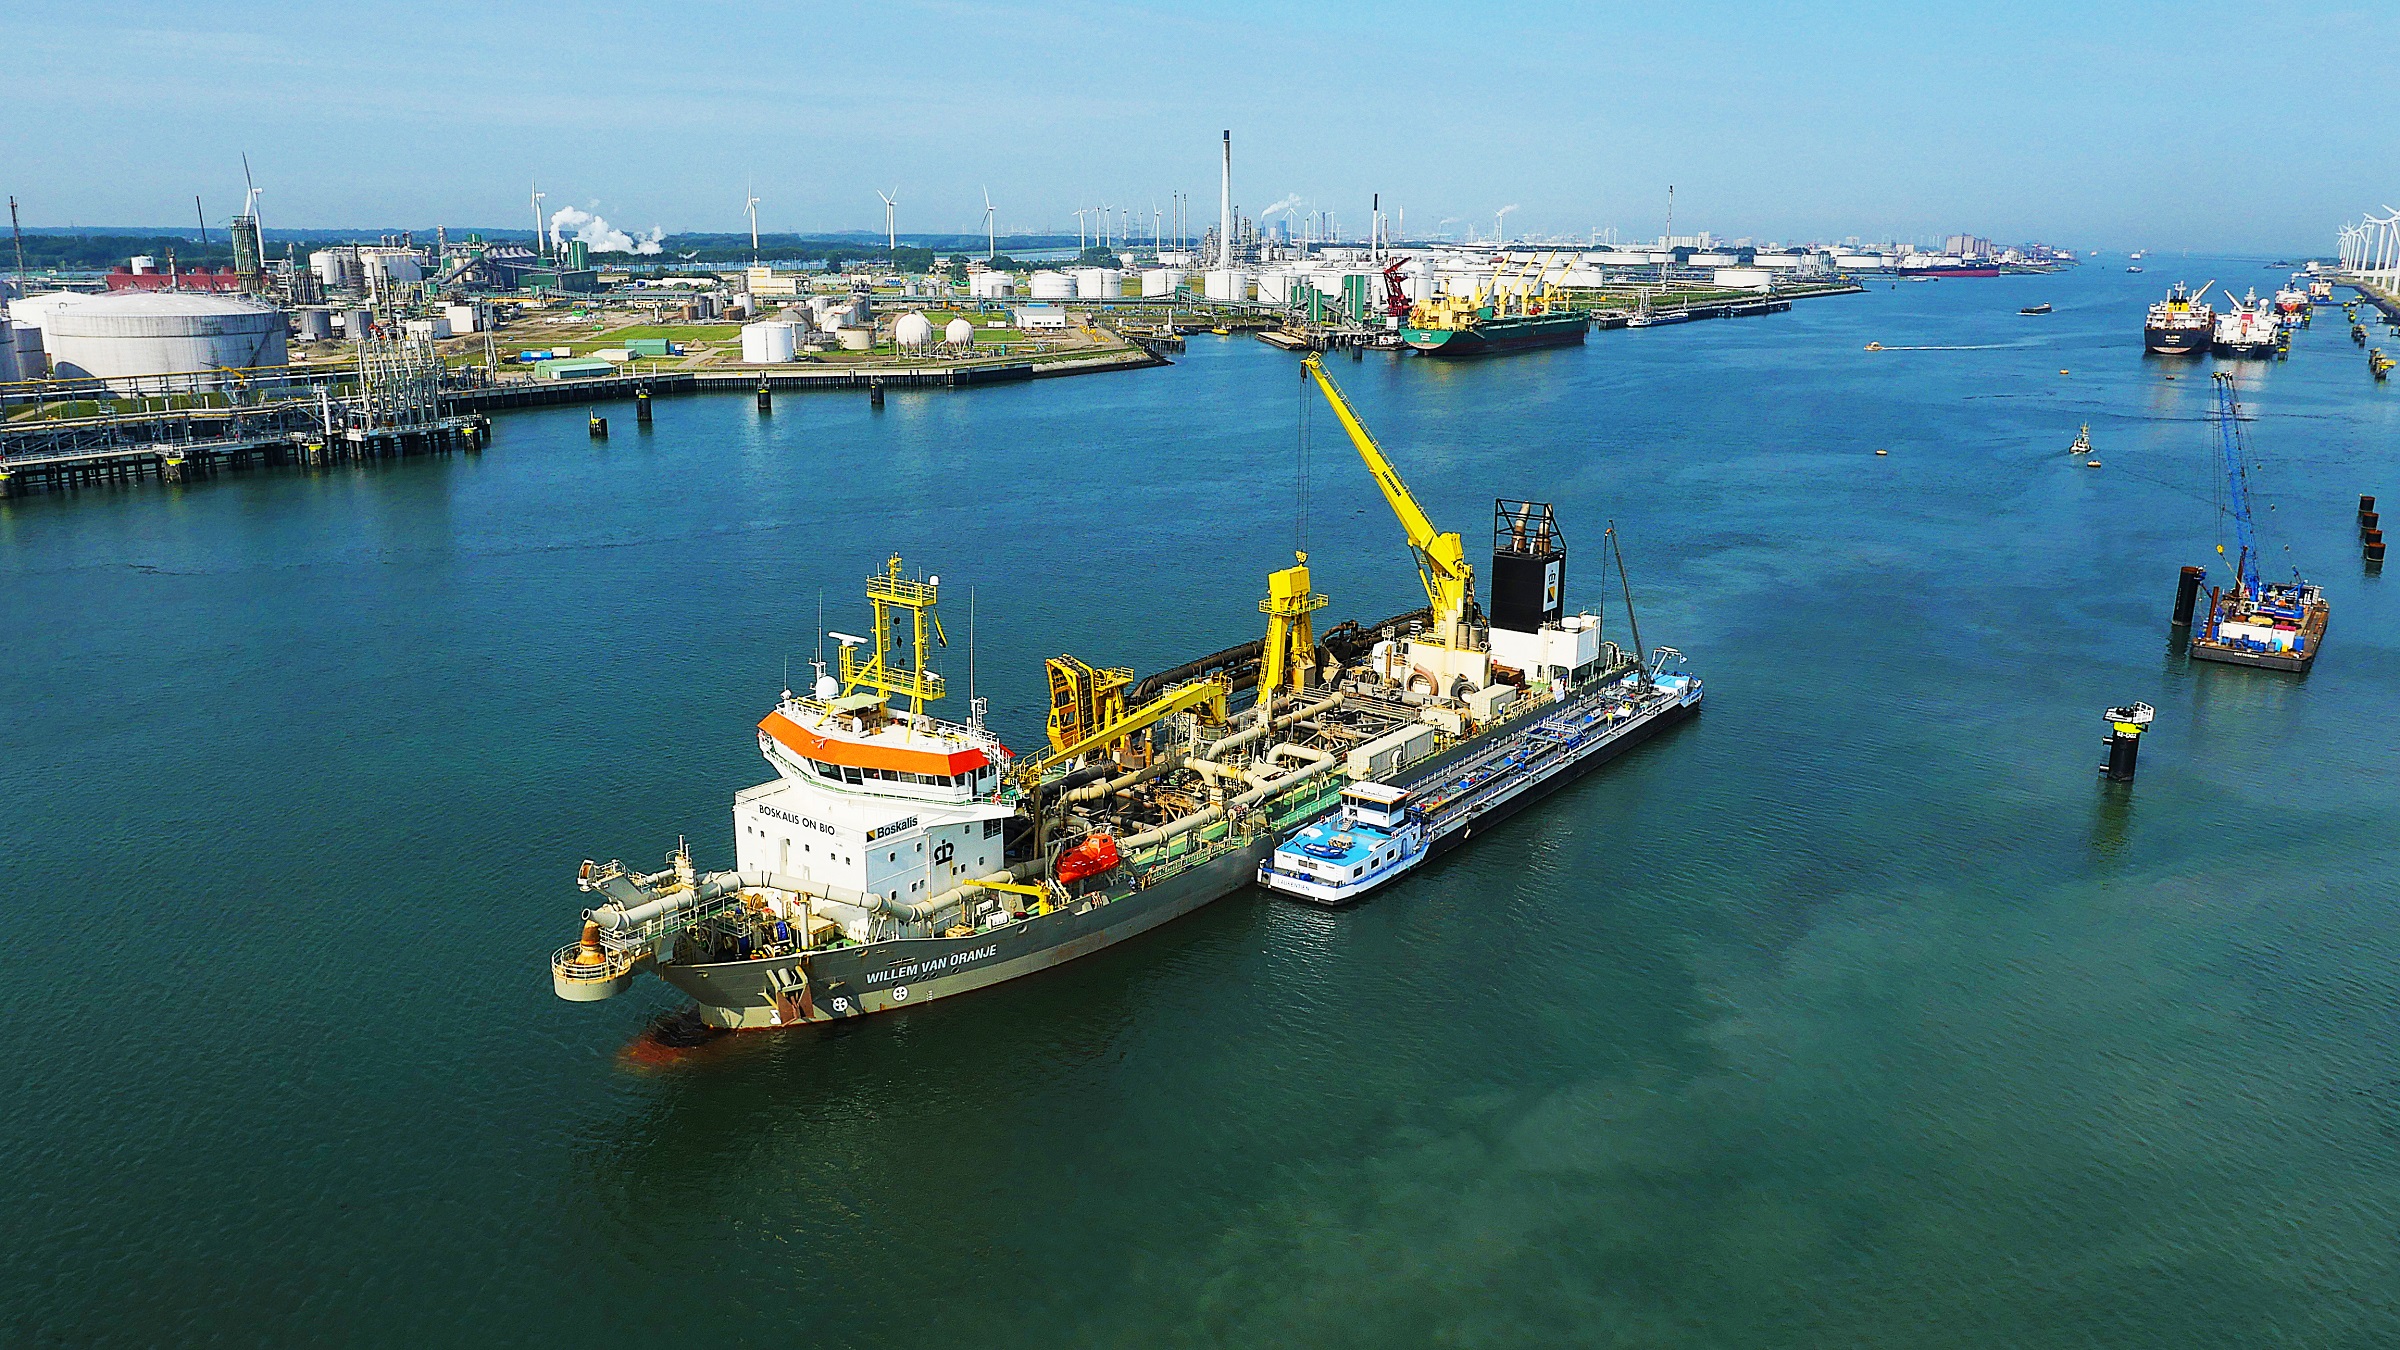 Boskalis takes delivery of largest bio-fuel consignment to date